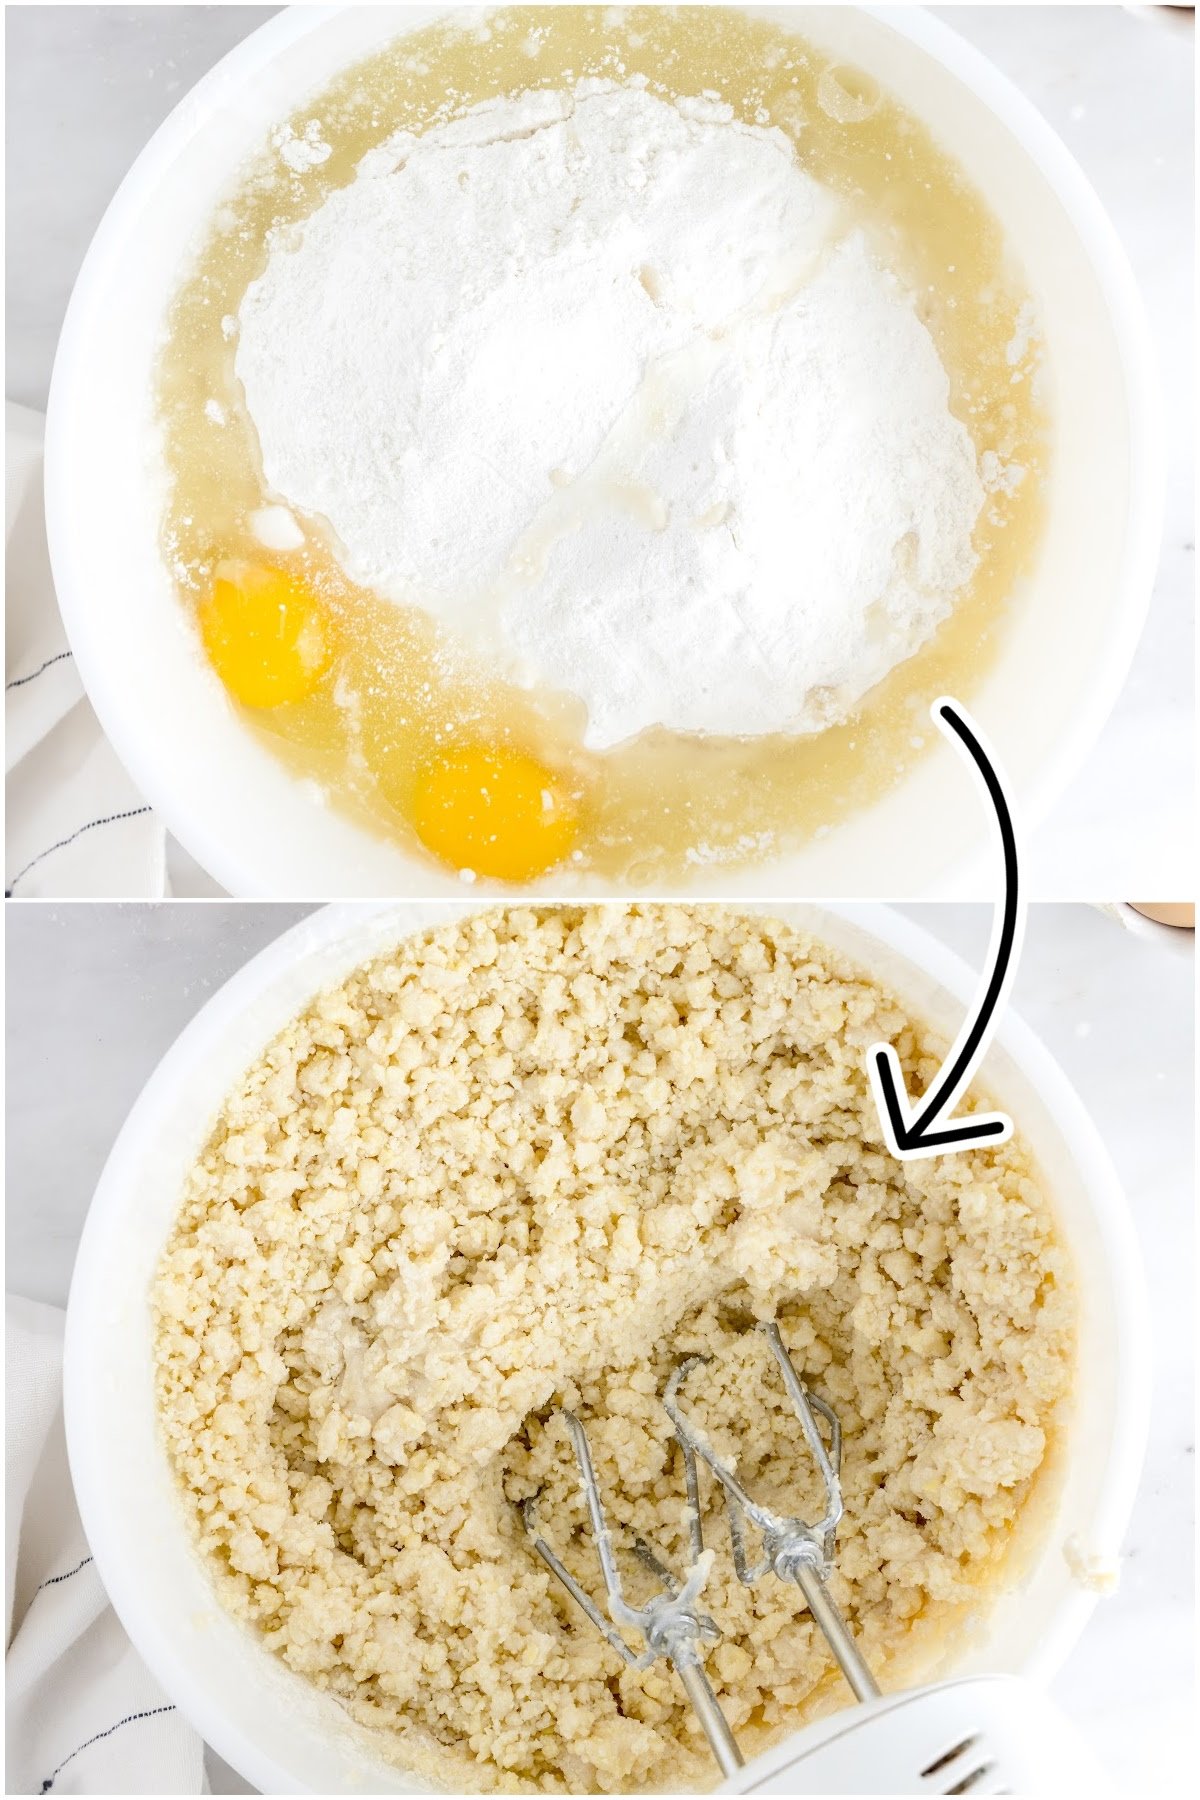 Cake mixes, eggs, and oil in a white mixing bowl before and after being mixed.